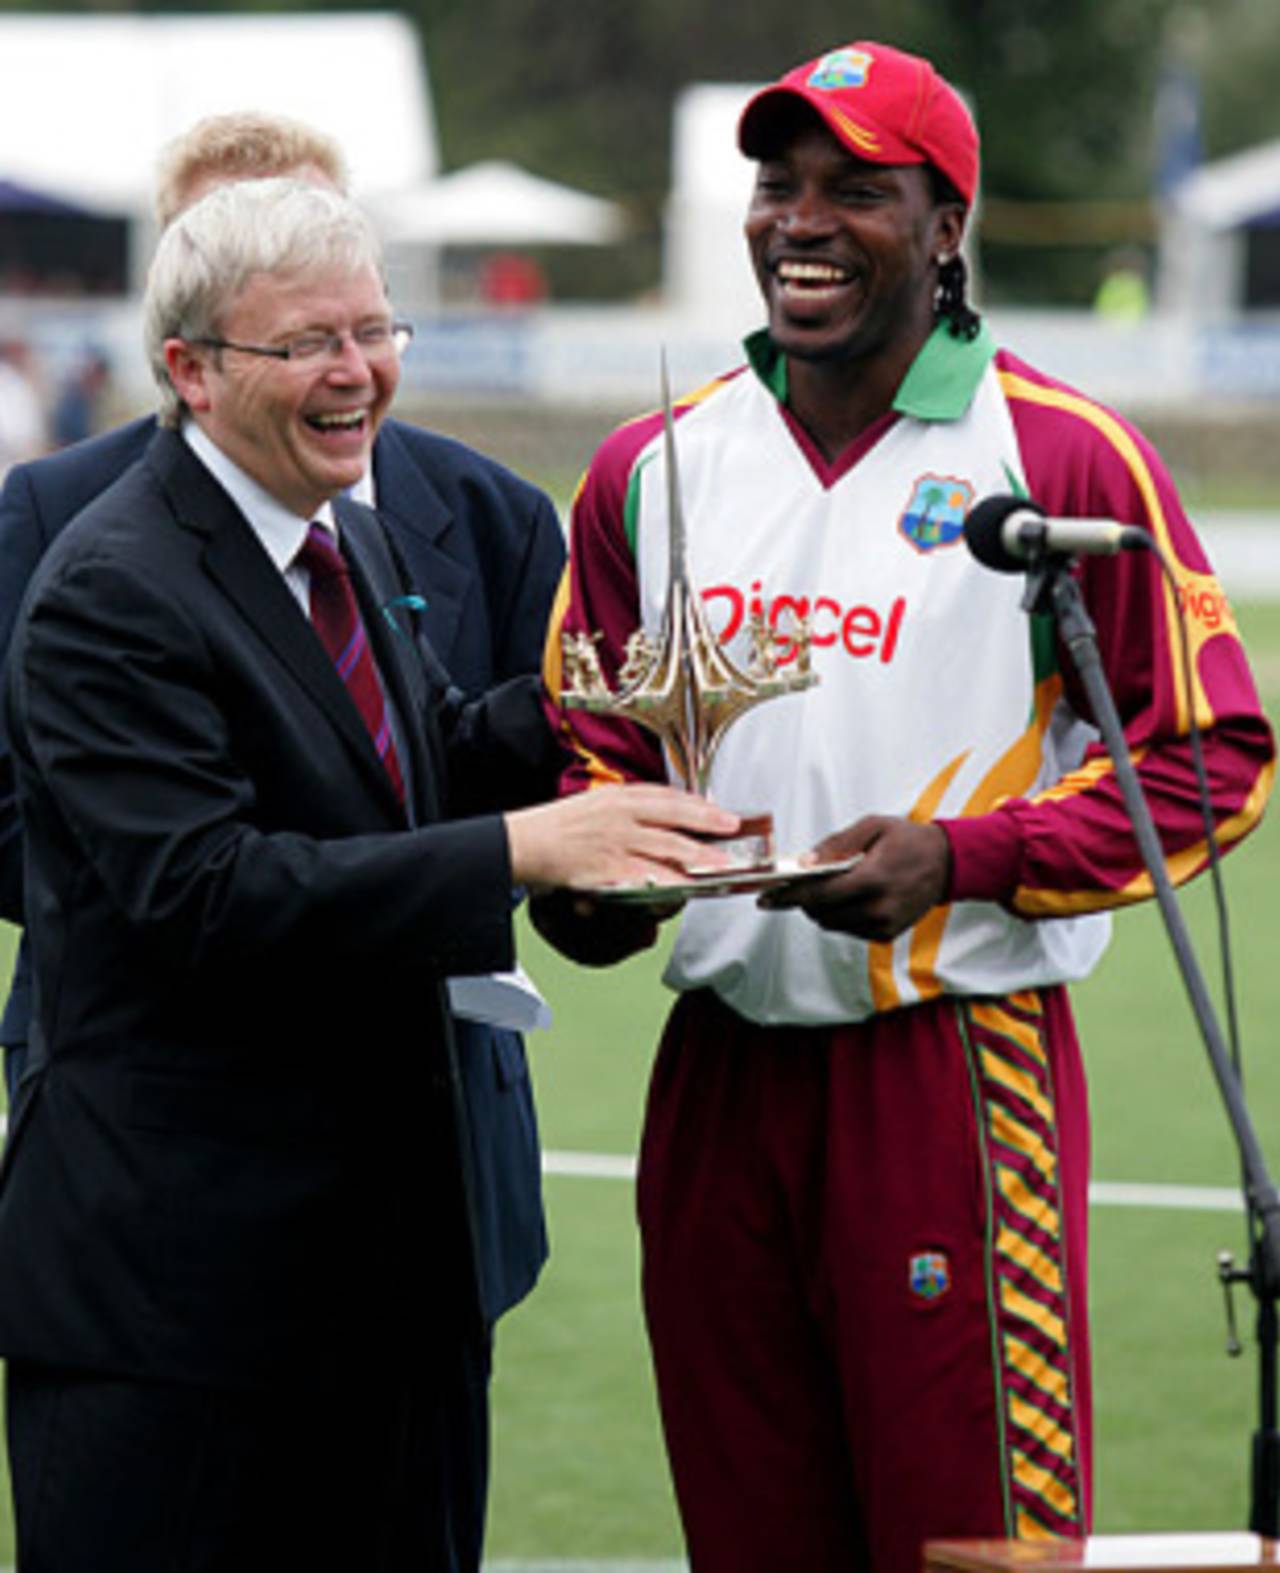 Prime Minister Kevin Rudd and Chris Gayle flash extra-bright smiles to distract attention from the fact that they are actually wrestling for the trophy&nbsp;&nbsp;&bull;&nbsp;&nbsp;Associated Press